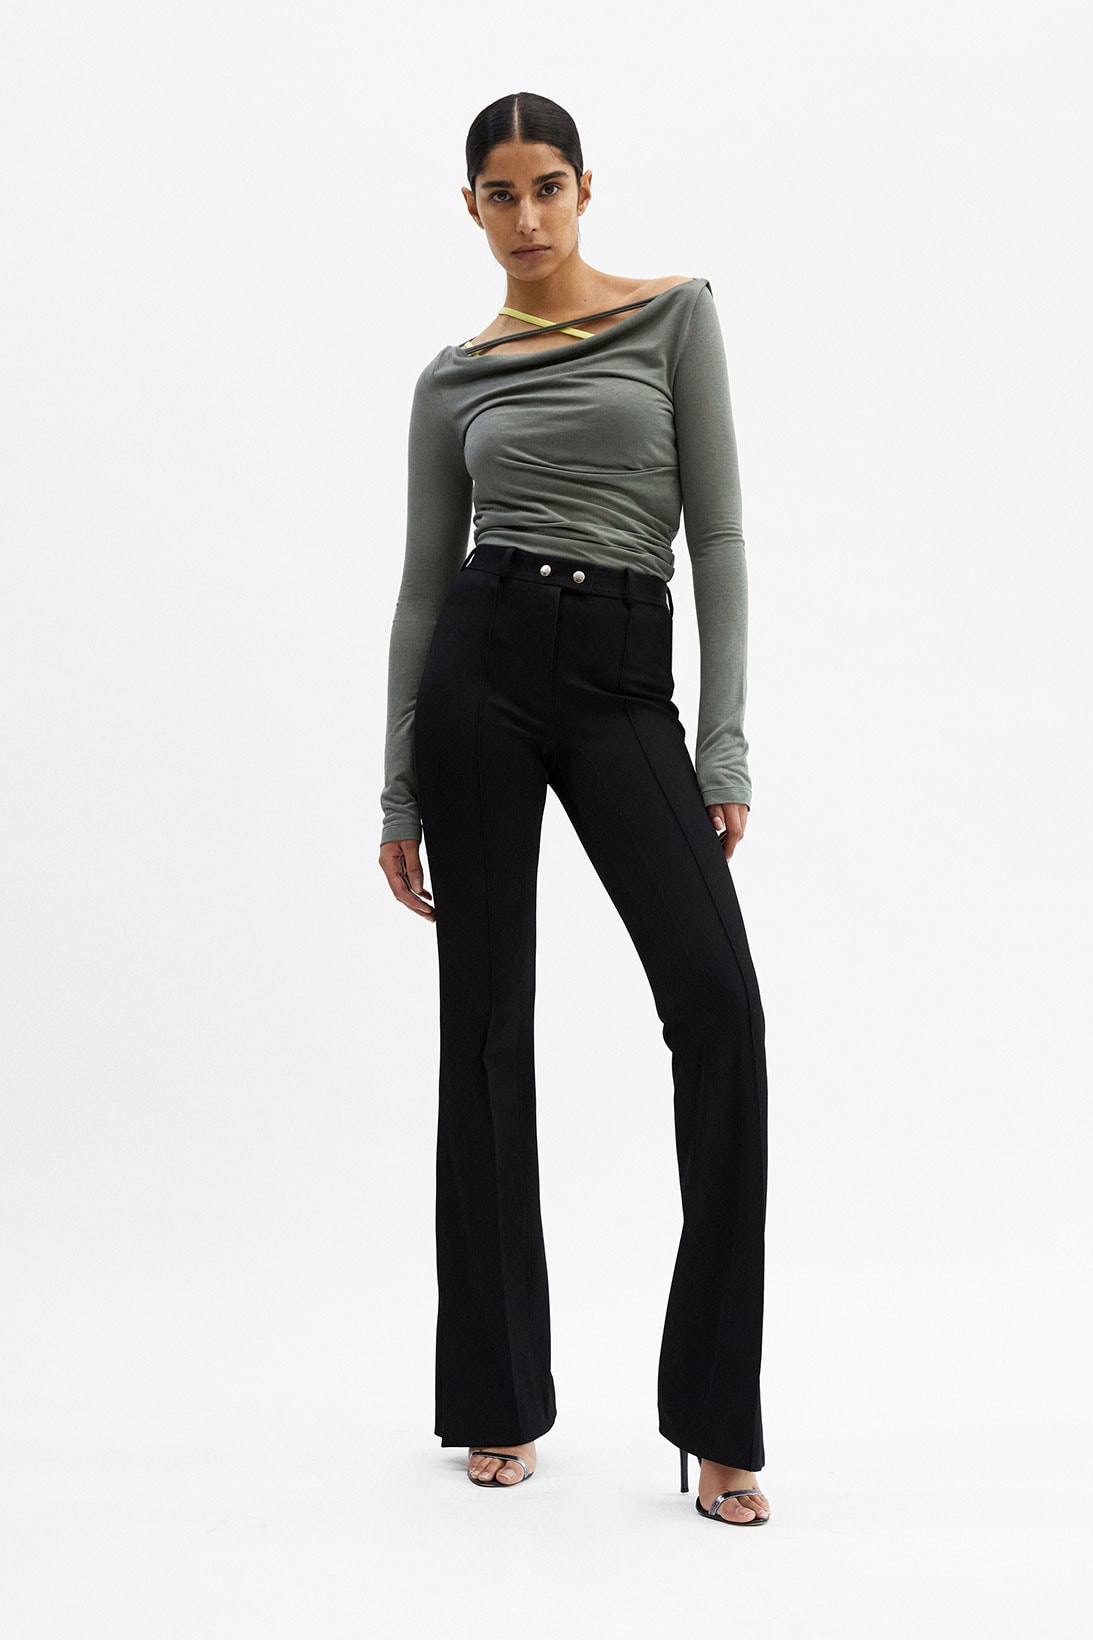 helmut lang fall winter 2021 fw21 collection lookbook long sleeved tee pants flared